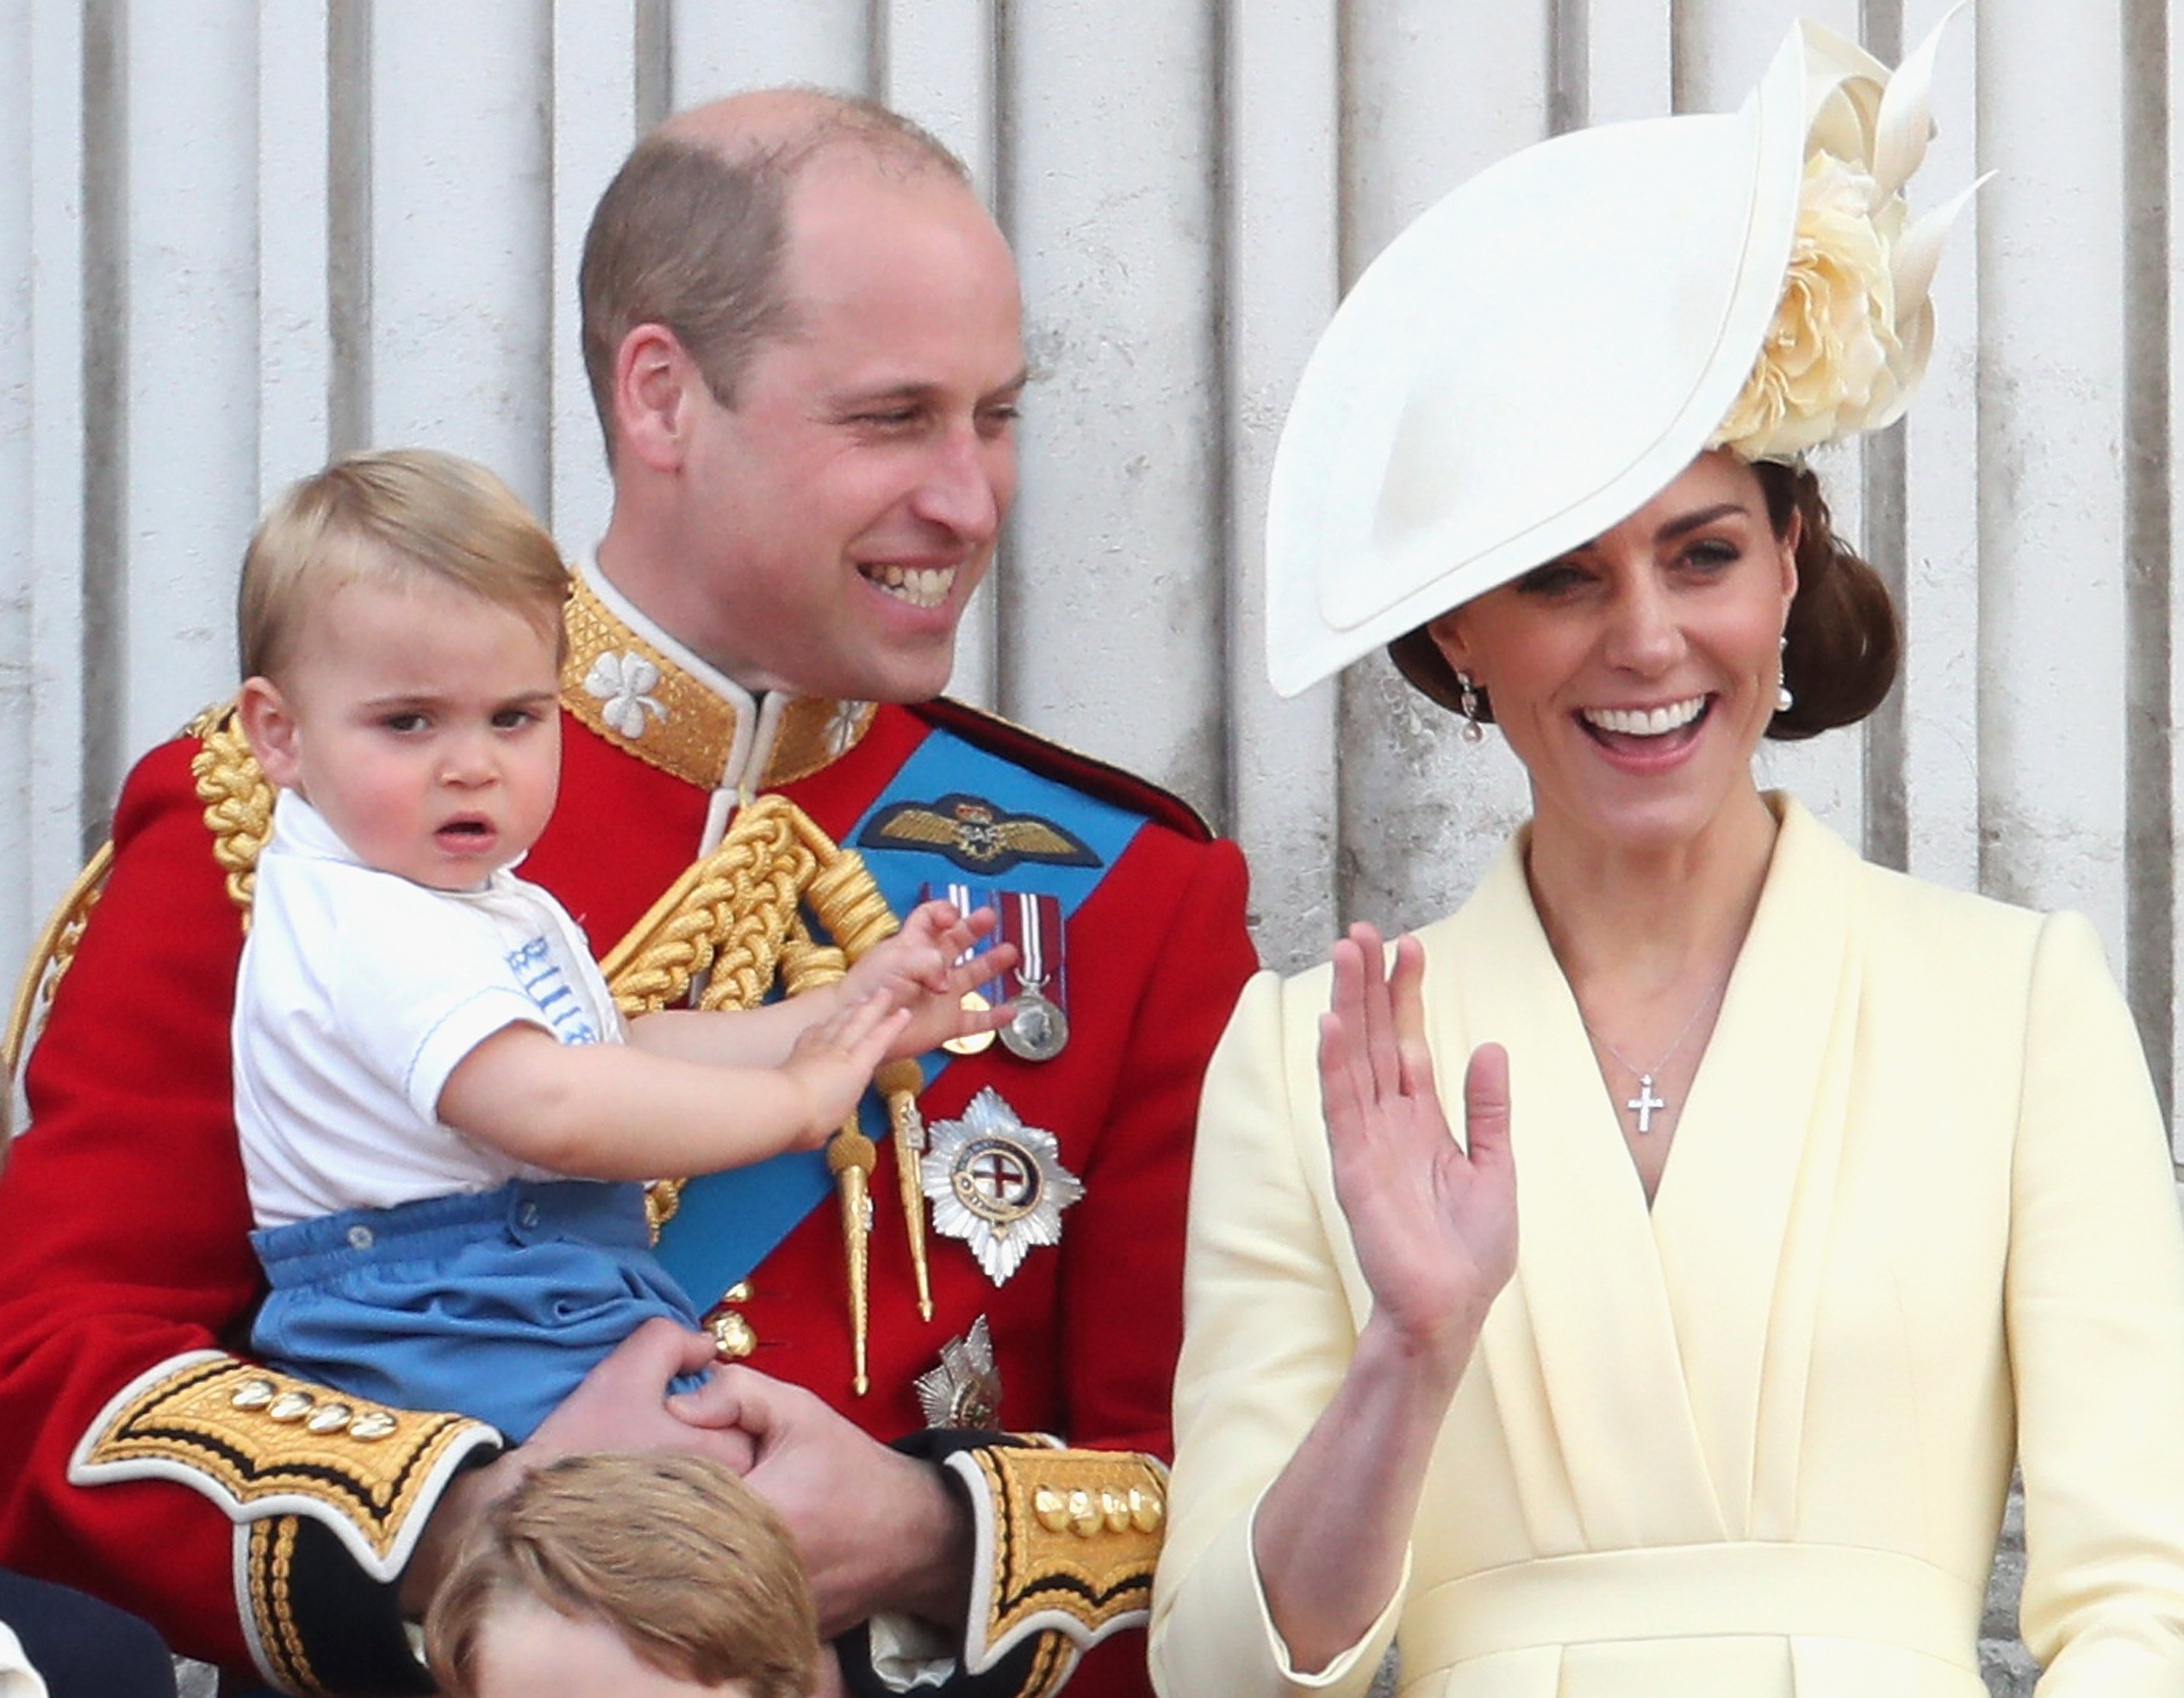 Prince William and Kate Middleton with Prince Louis at the Trooping The Colour, on Queen Elizabeth's annual birthday parade, on June 8, 2019 in London, England. | Source: Getty Images